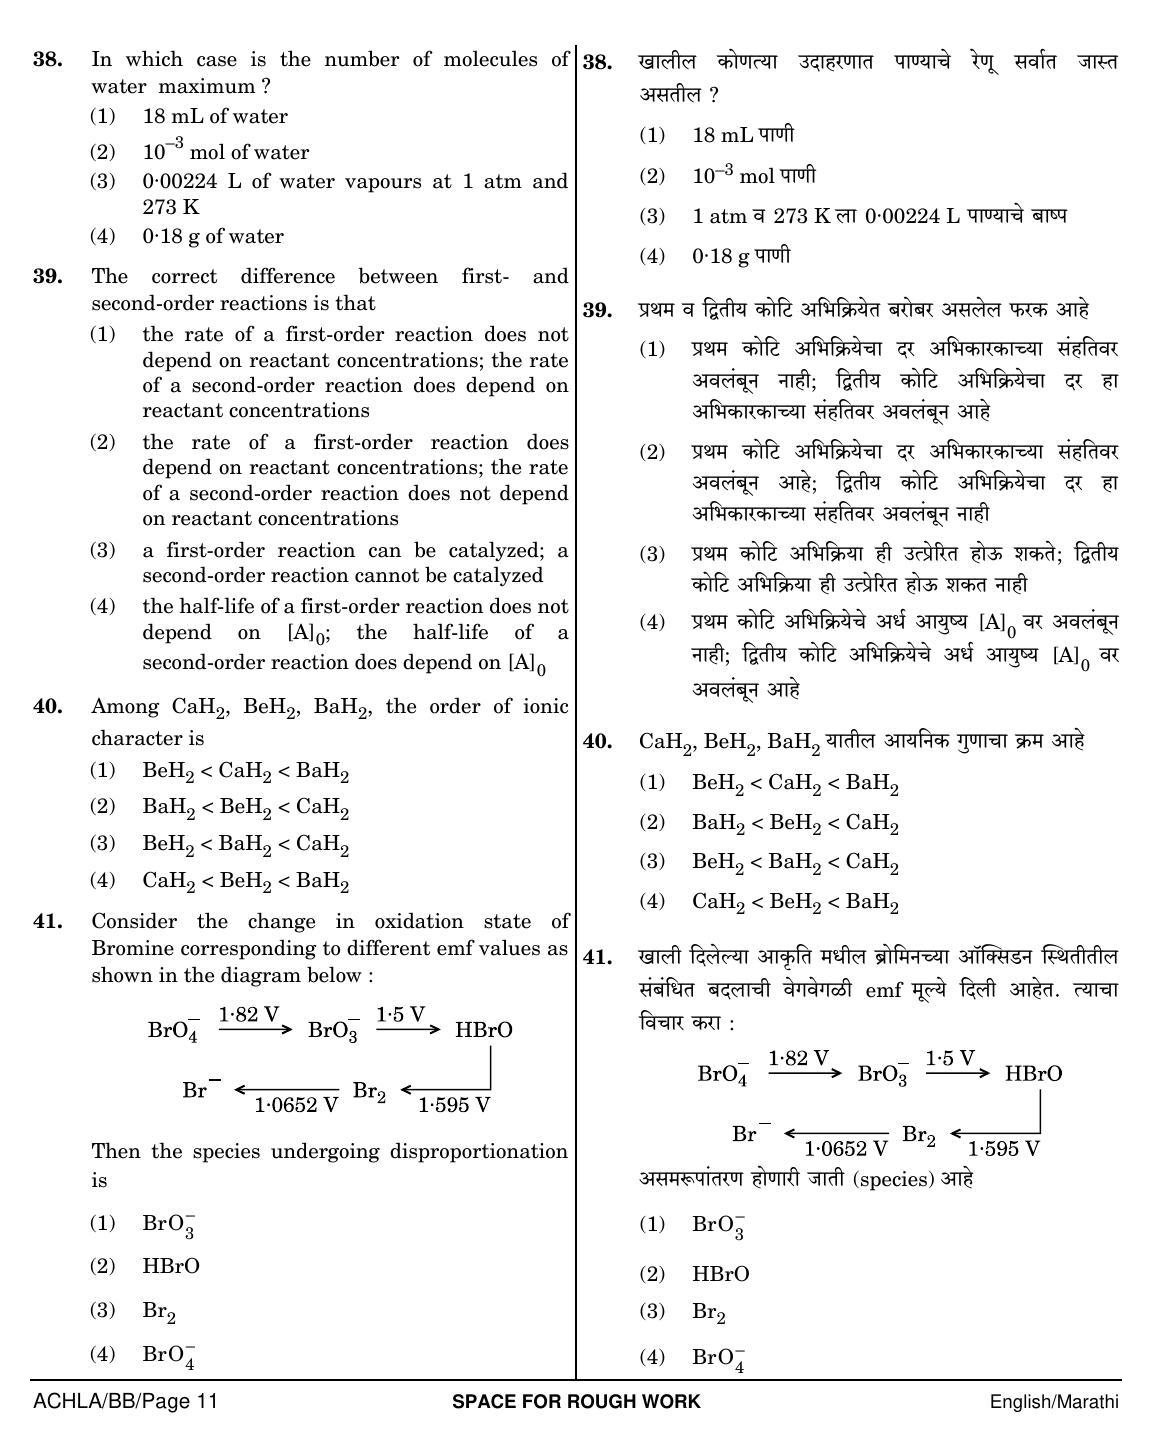 NEET Marathi BB 2018 Question Paper - Page 11